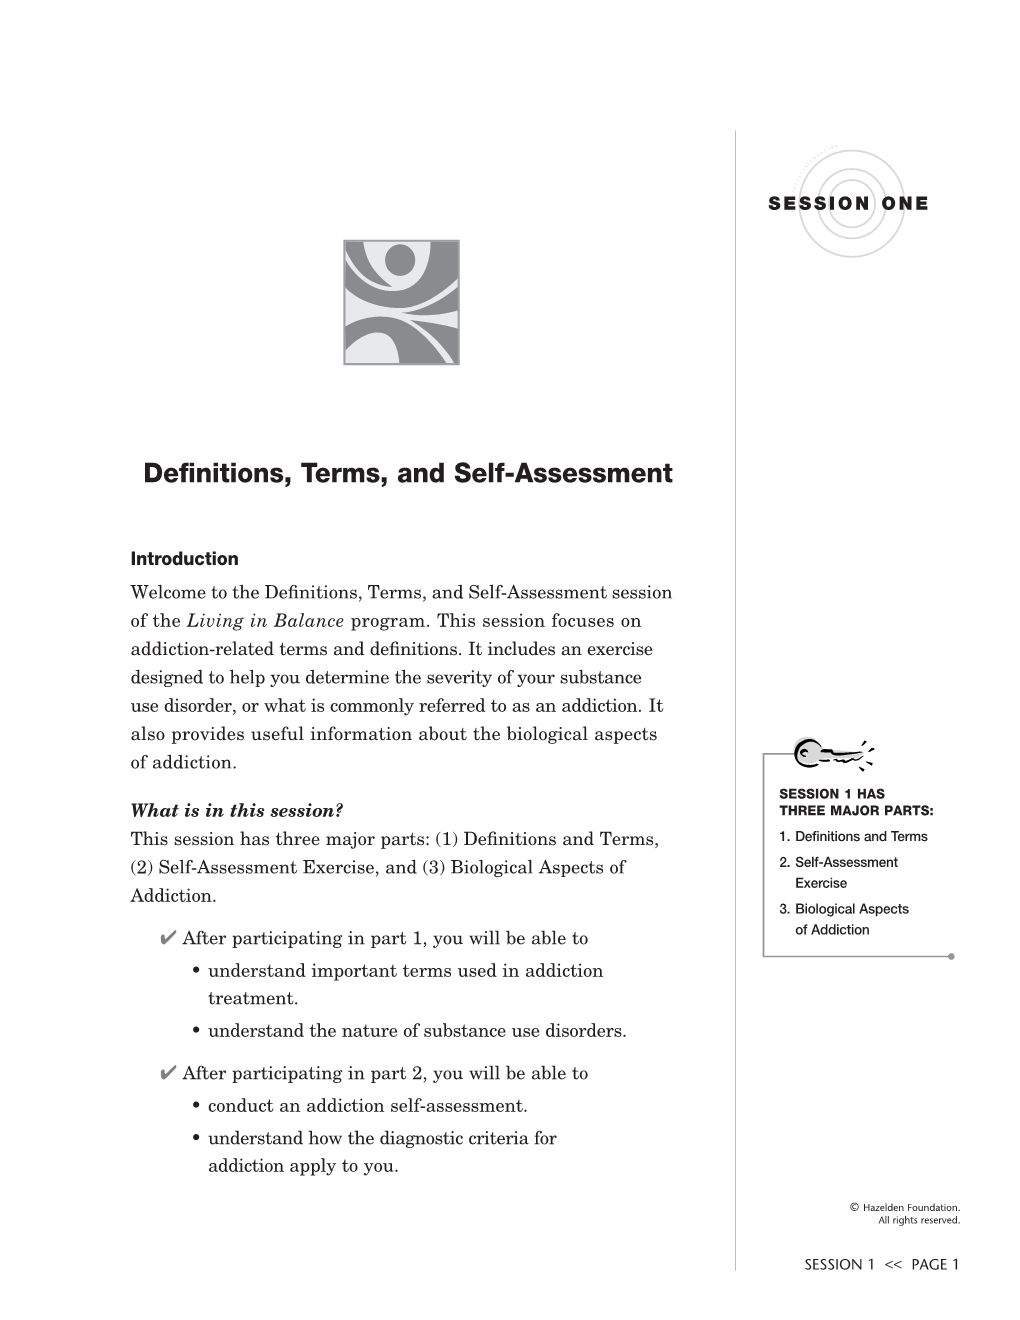 Session 1 Definitions, Terms, and Self-Assessment